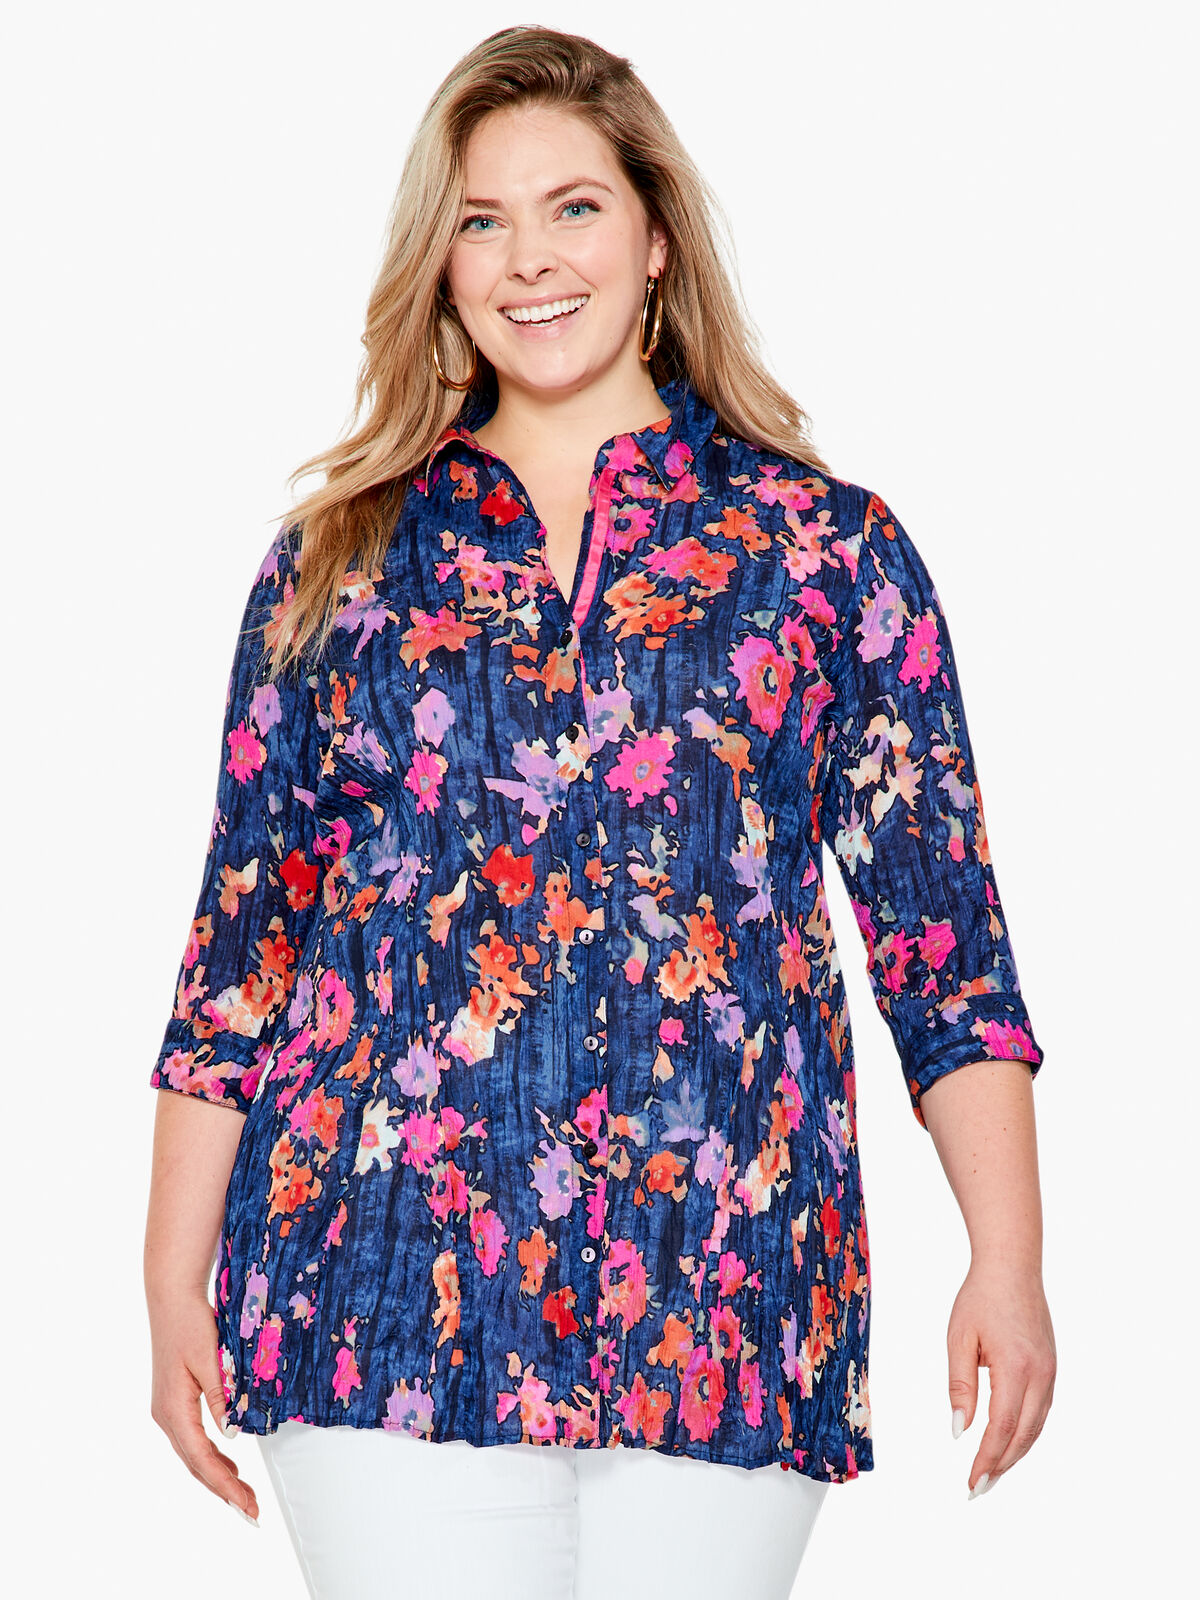 Glowing Blossoms Crinkle Top | NIC+ZOE